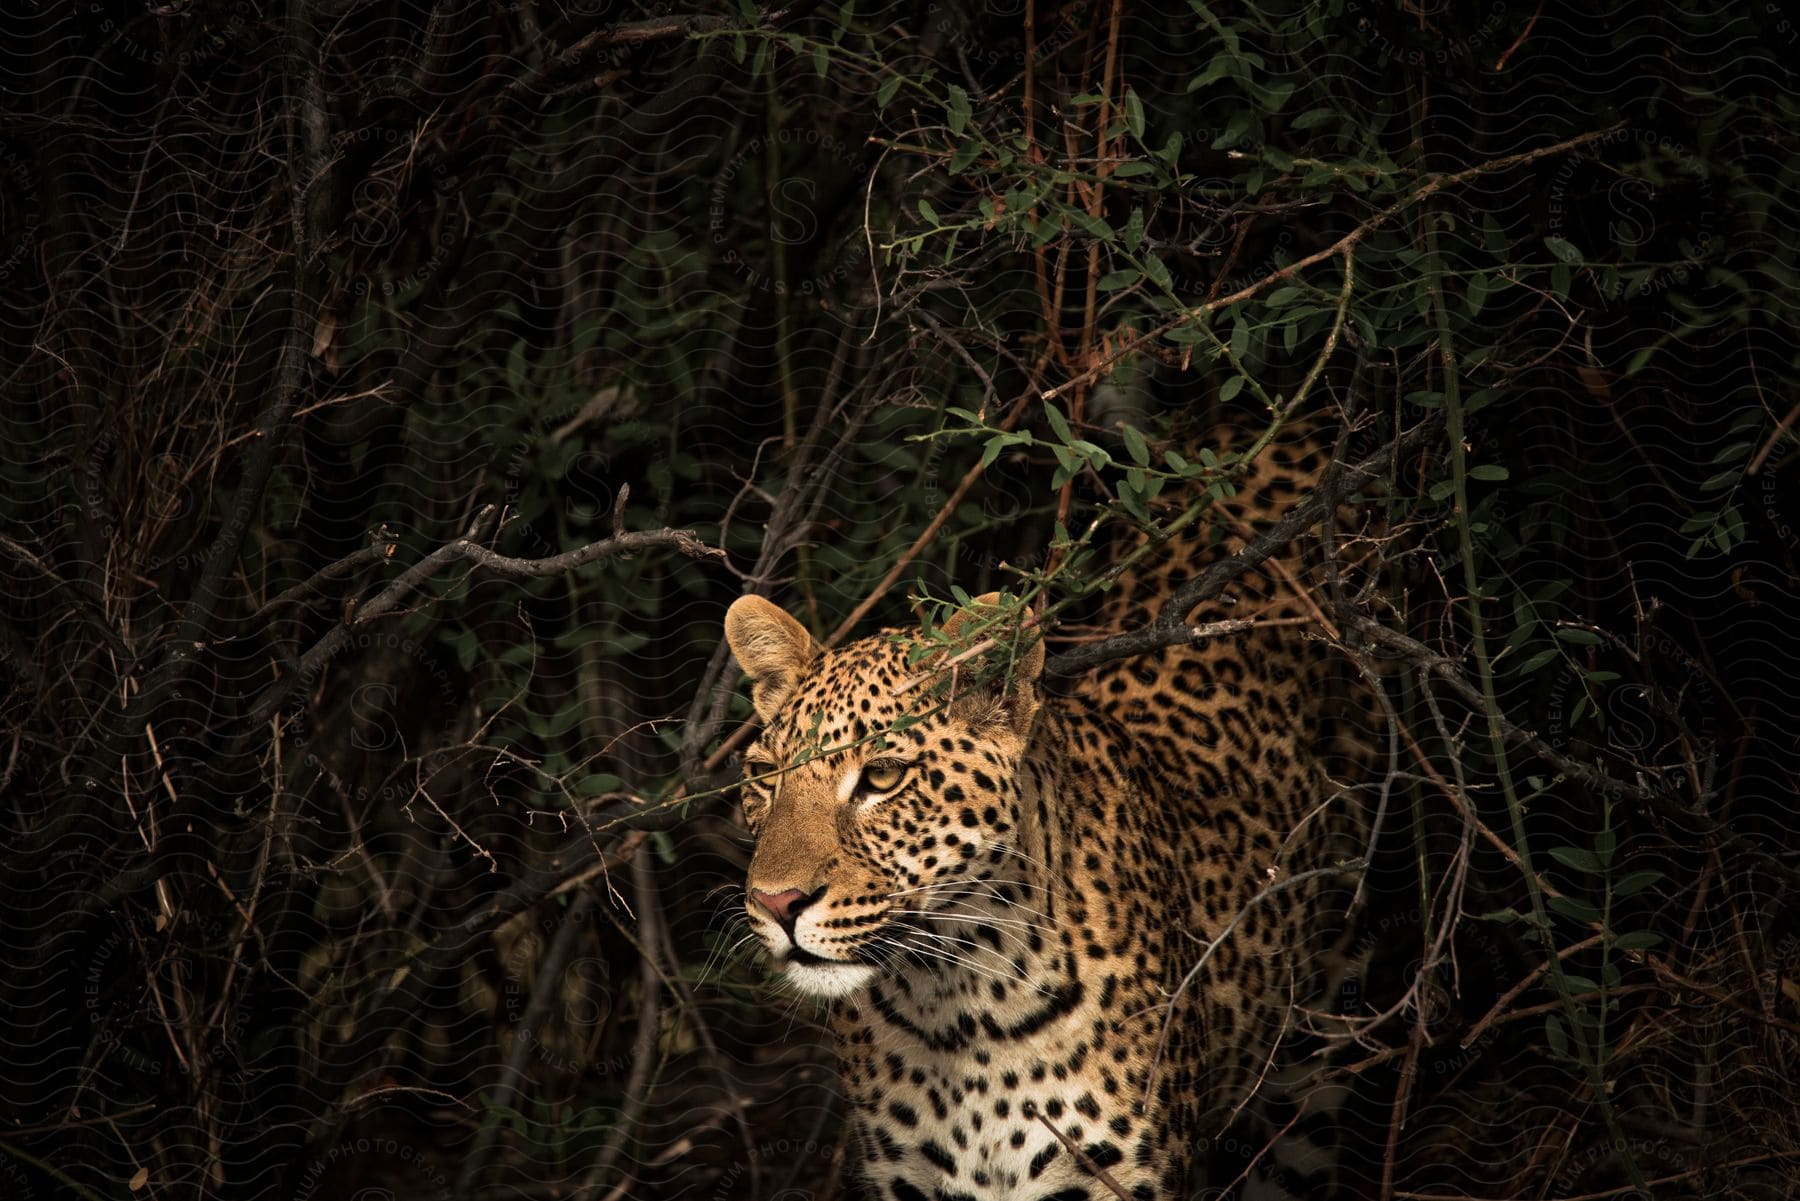 A leopard hiding in a thicket at night